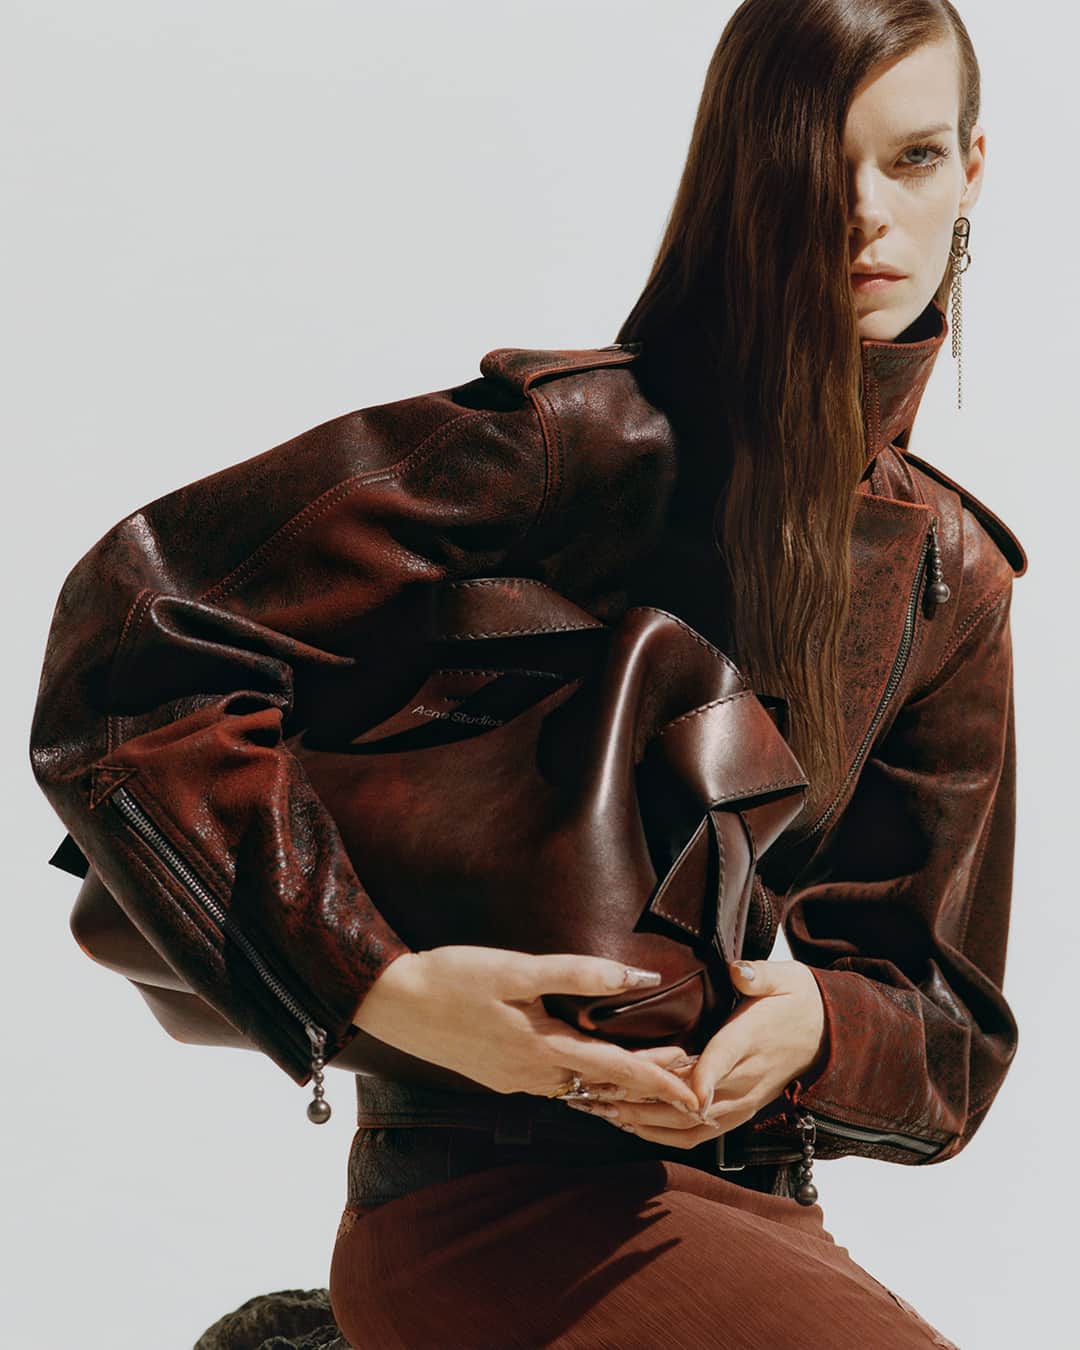 Acne Studiosのインスタグラム：「Leather on leather for a monochrome look. The #Musubi midi bag in vintage brown and our new hourglass biker jacket, now in store and online.⁣ ⁣ Photographer: @EstelleHanania⁣ Stylist: @Leopolda.Duchemin⁣ Hair: @TomWrightHair⁣ Make-Up: @Masae__Ito⁣ Set Design: #AliceKirkpatrick (@Alicekpk) ⁣ Casting: @JuliaLangeCasting⁣ Nails: @ElsaDurrens」